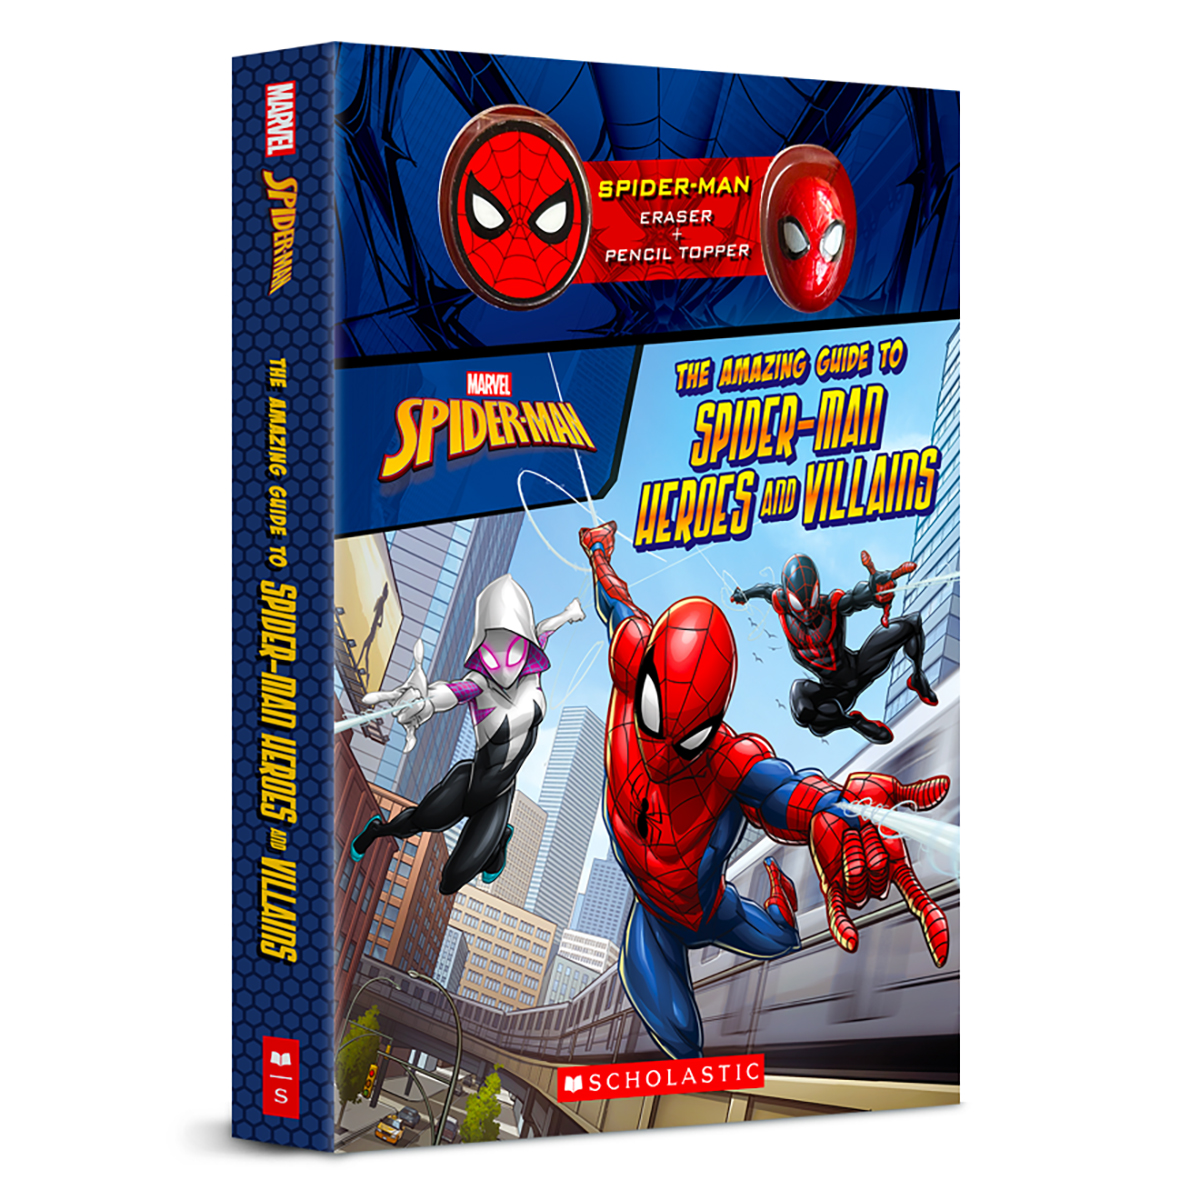  Spider-Man: The Amazing Guide to Spider-Man Heroes and Villains 